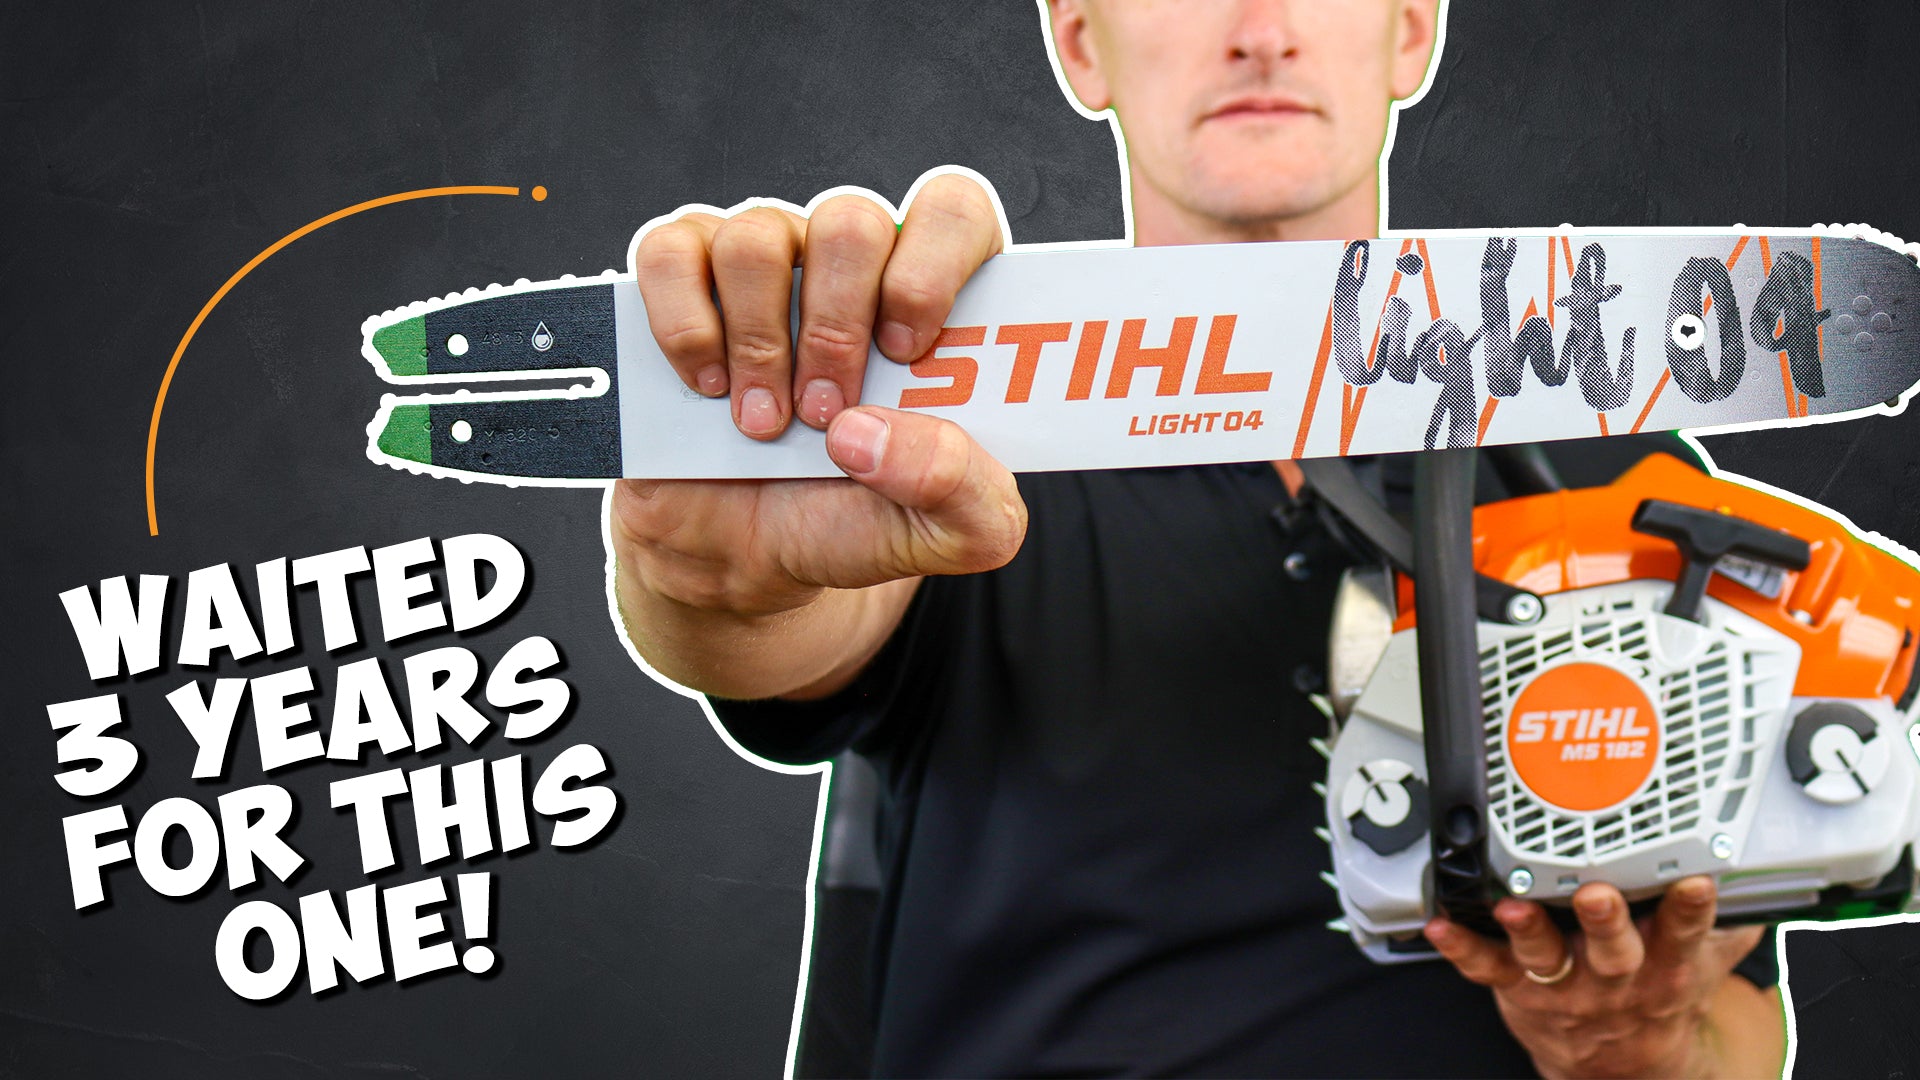 Brand New STIHL MS 182 Chainsaw - 1st Ever Unboxing!